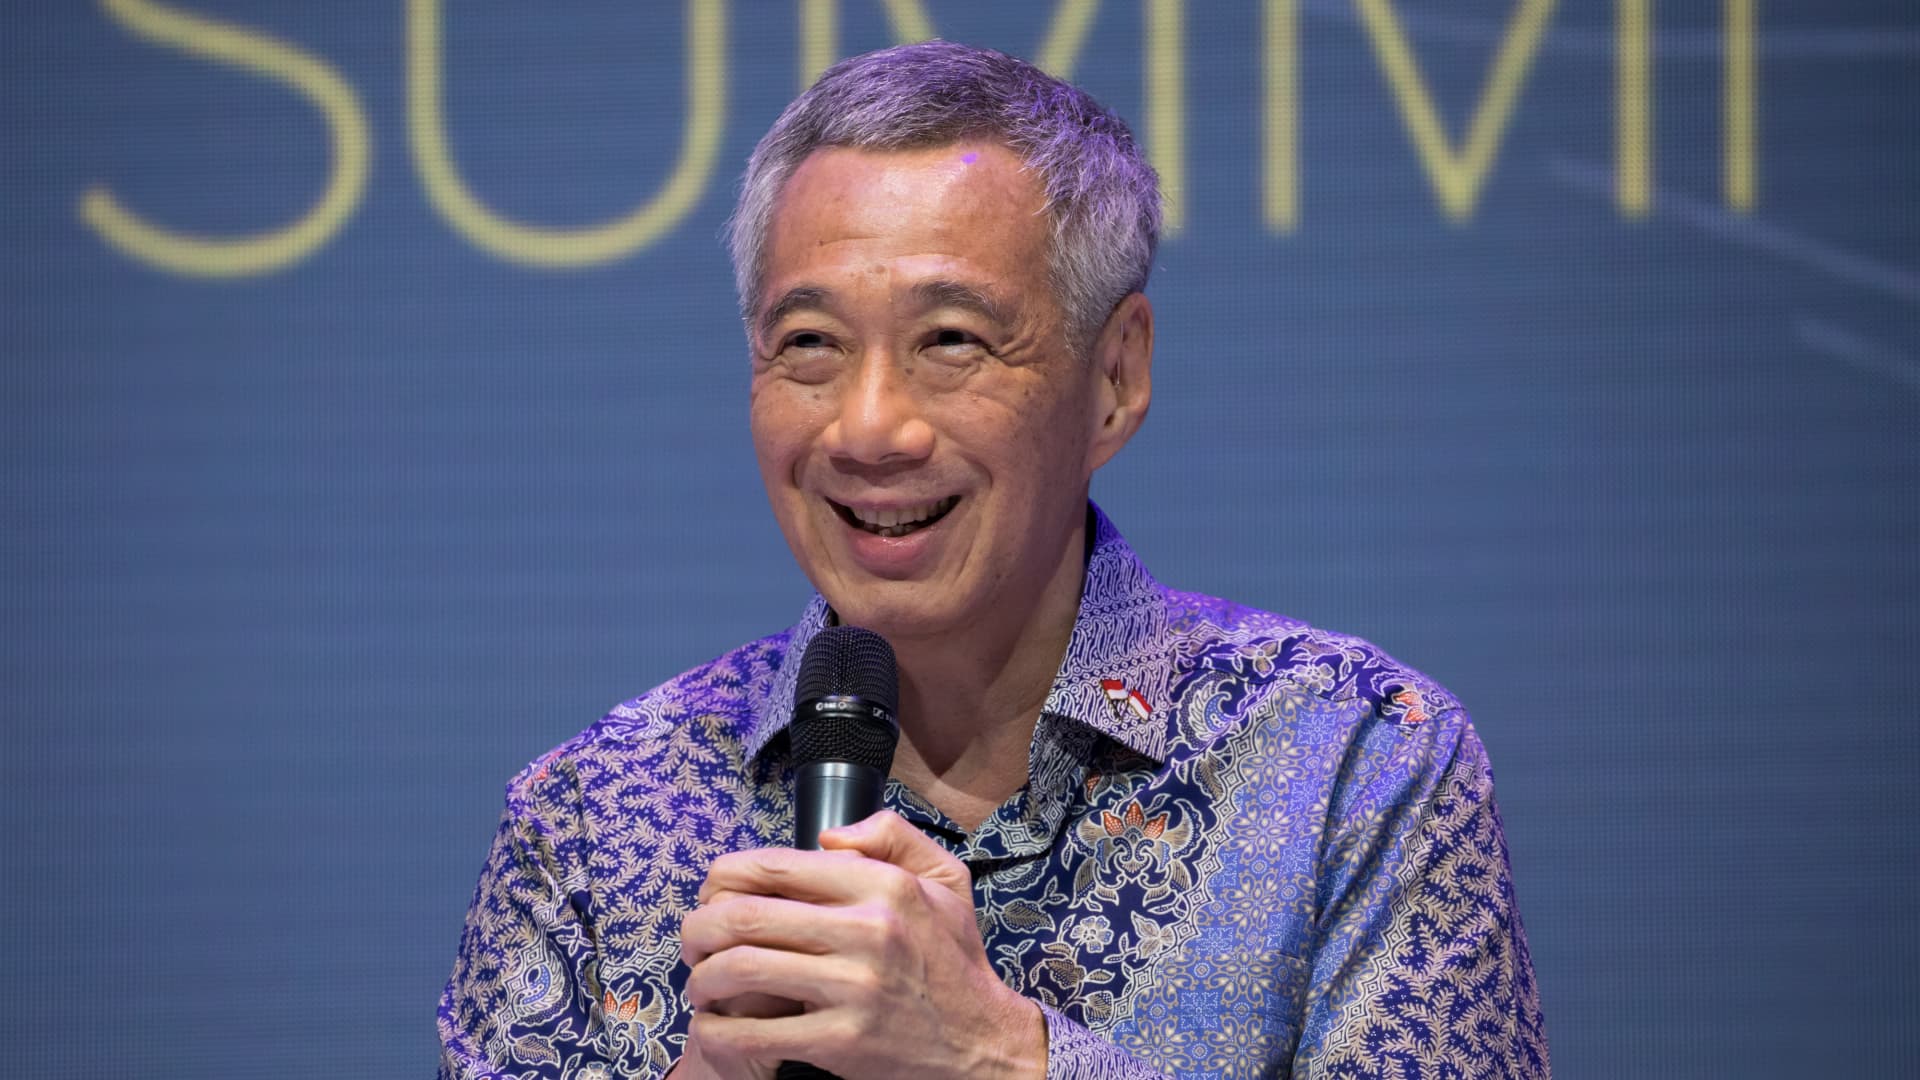 Singapore Prime Minister Lee Hsien Loong tests positive for Covid